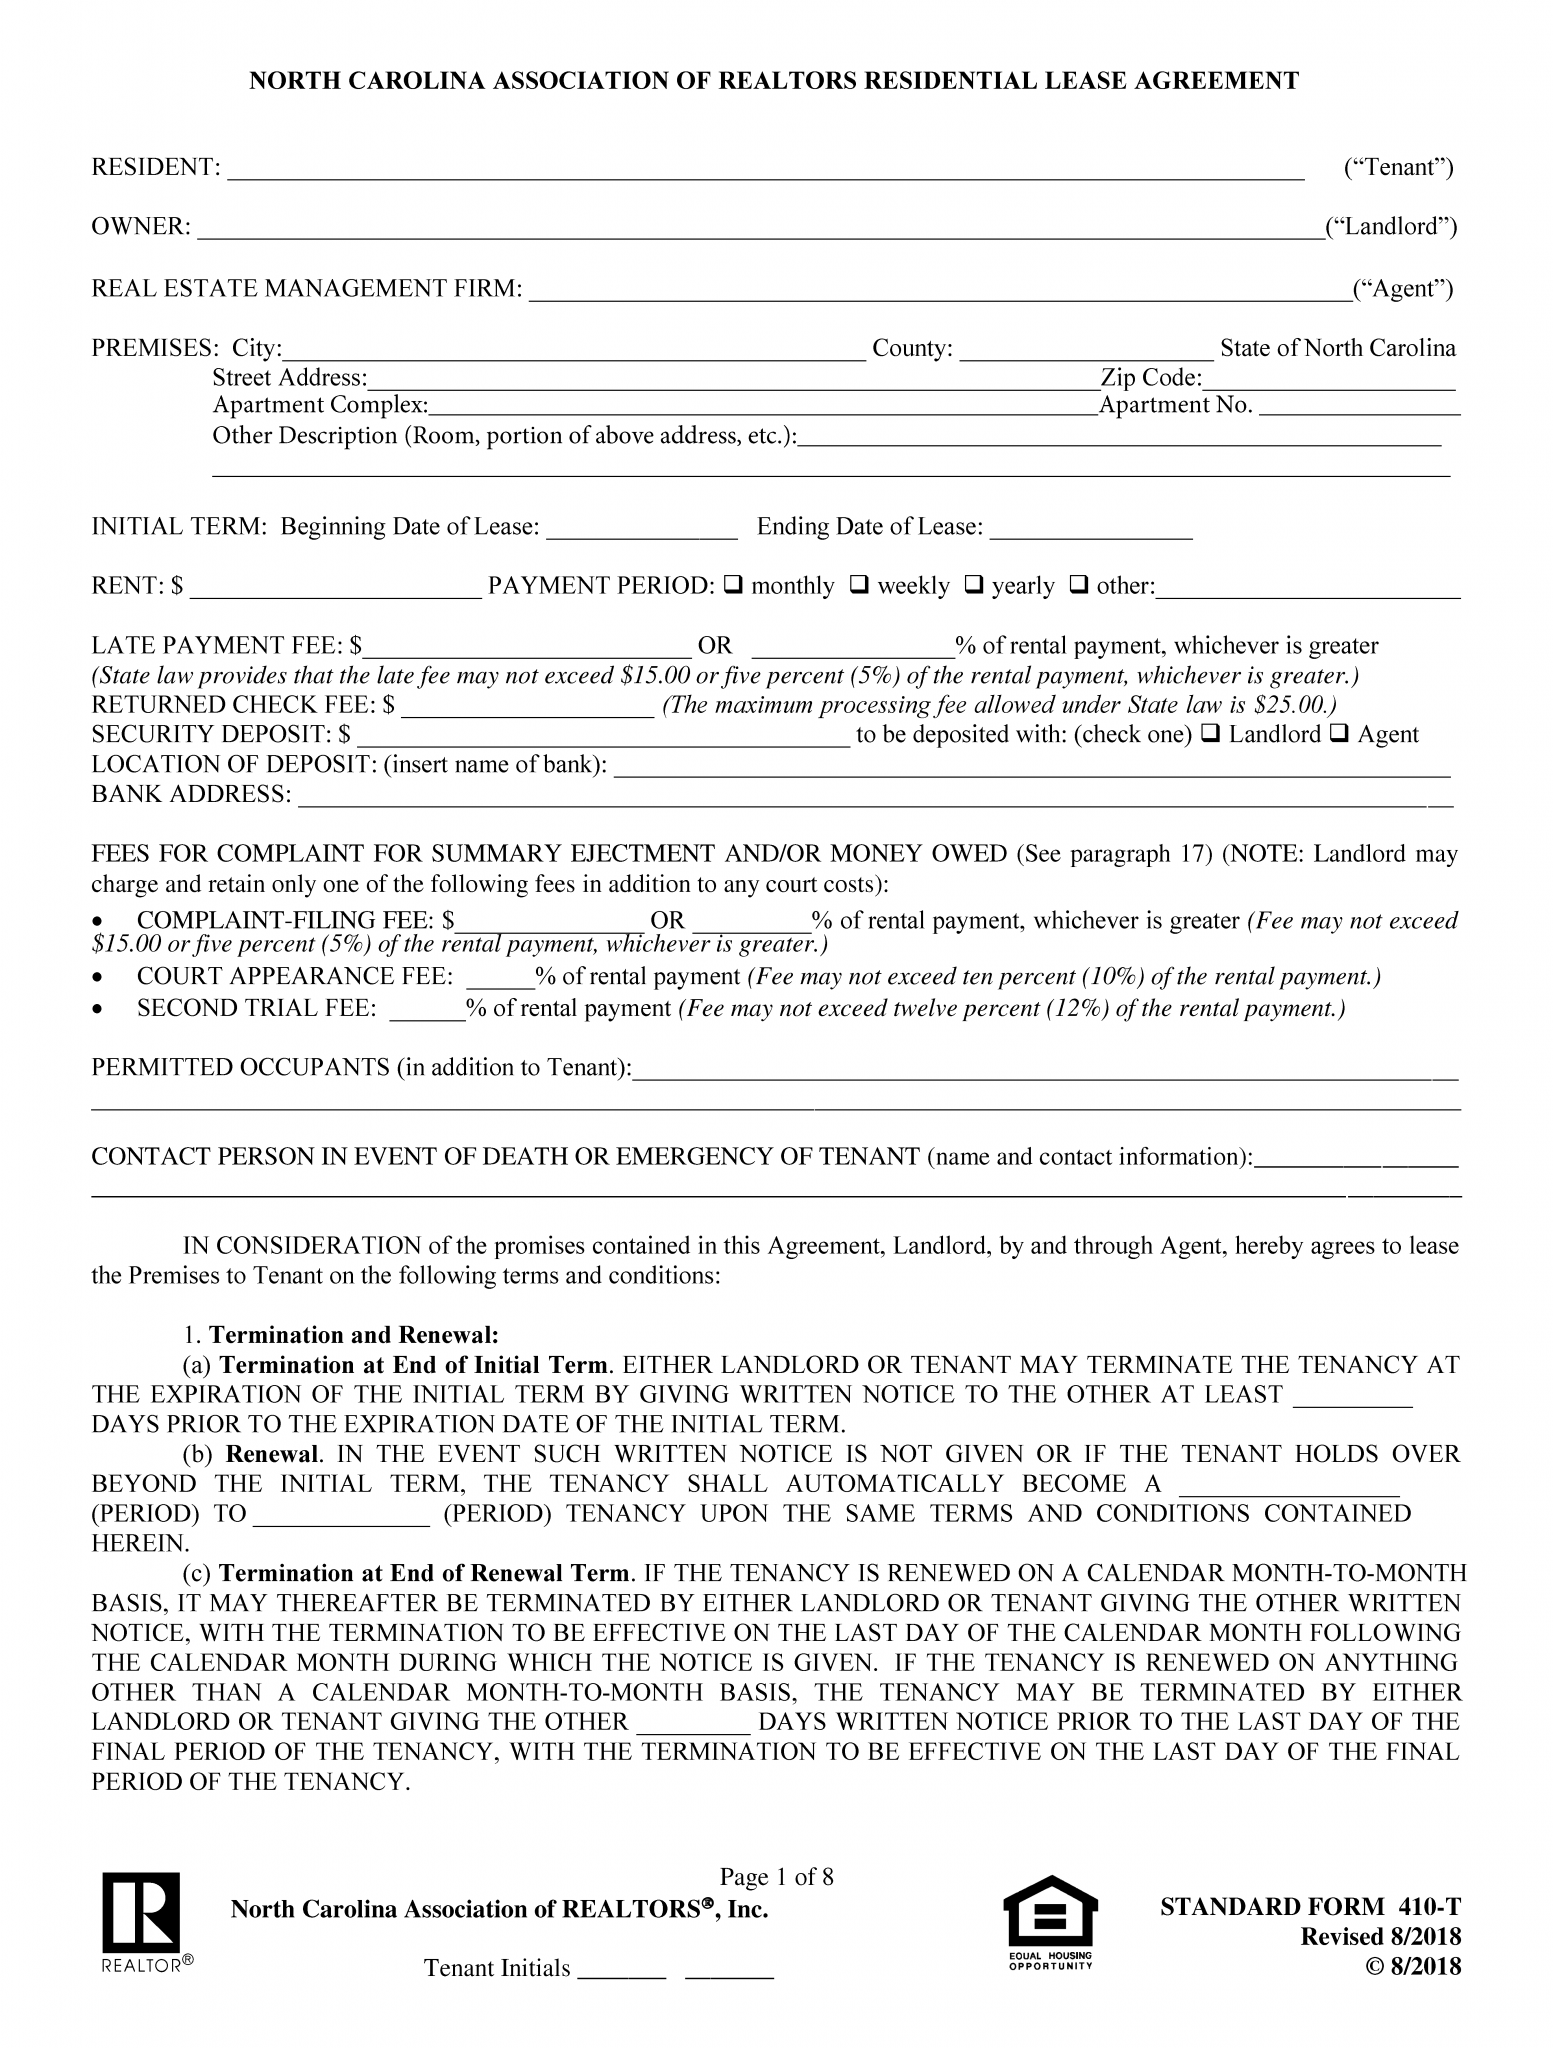 North Carolina Residential Lease Agreement Template